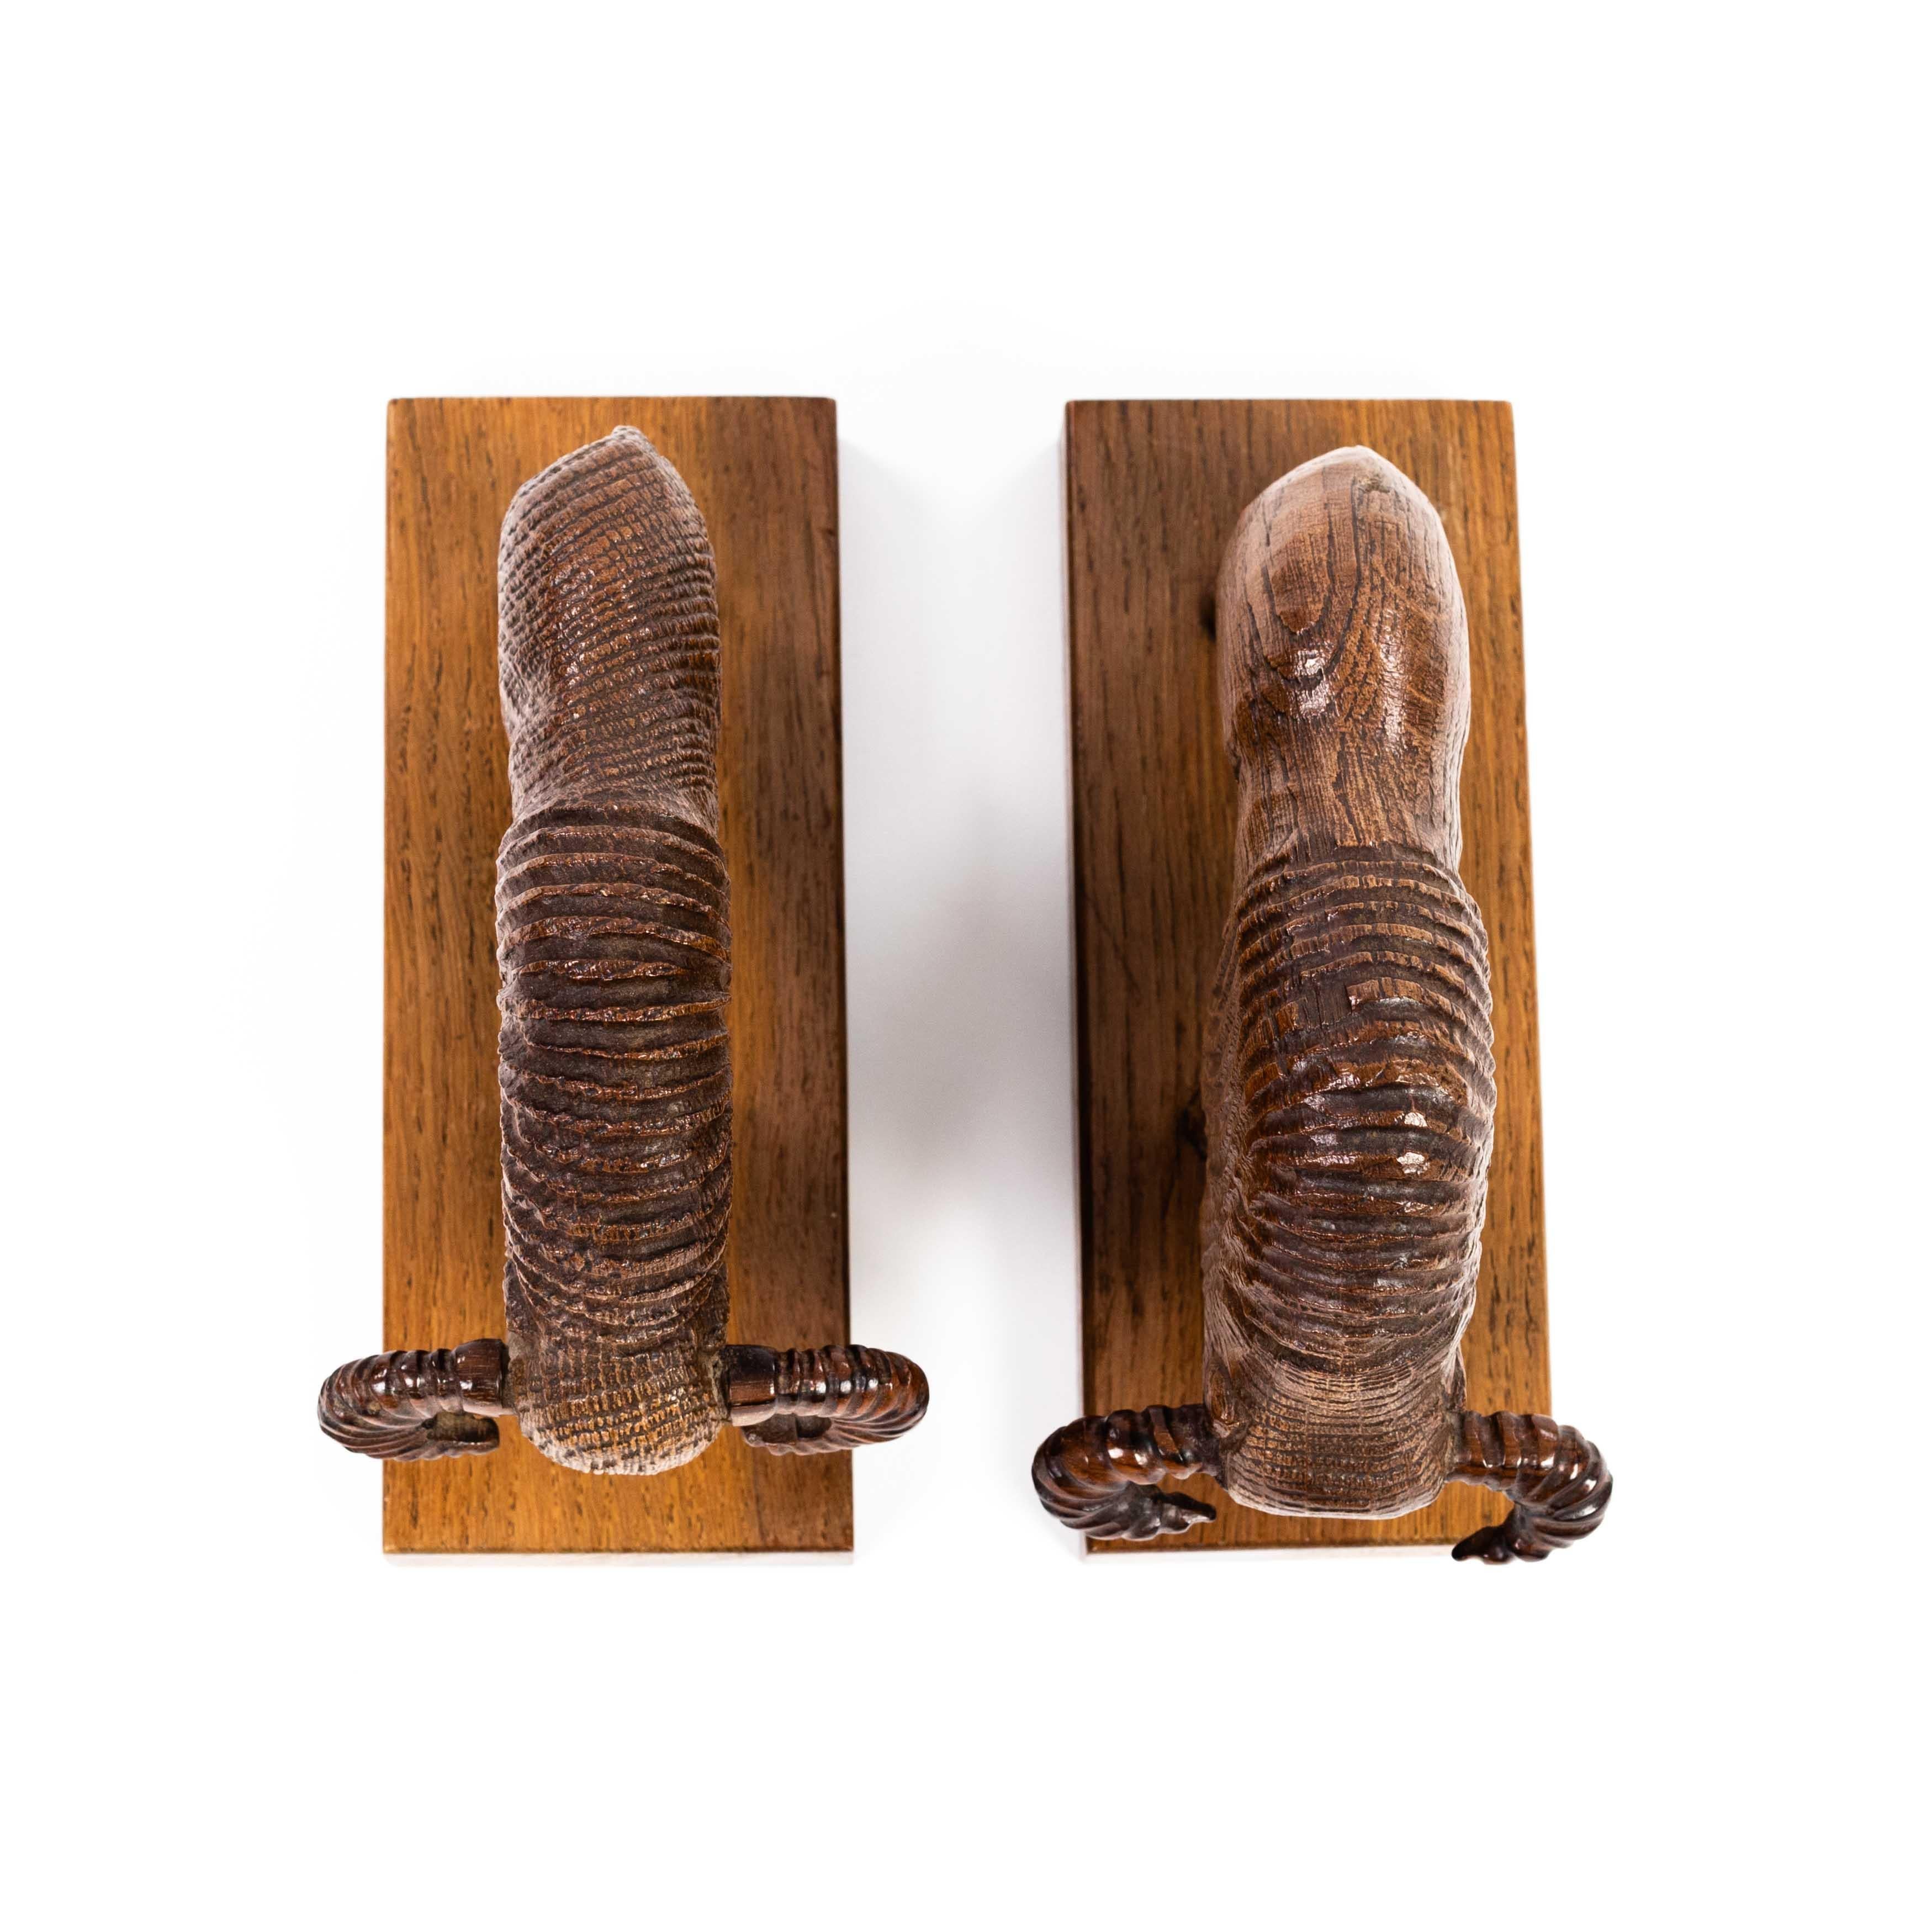 Pair of French Carved Solid Oak Art Deco Bookends Signed E. JODET, Faiences etc. For Sale 1